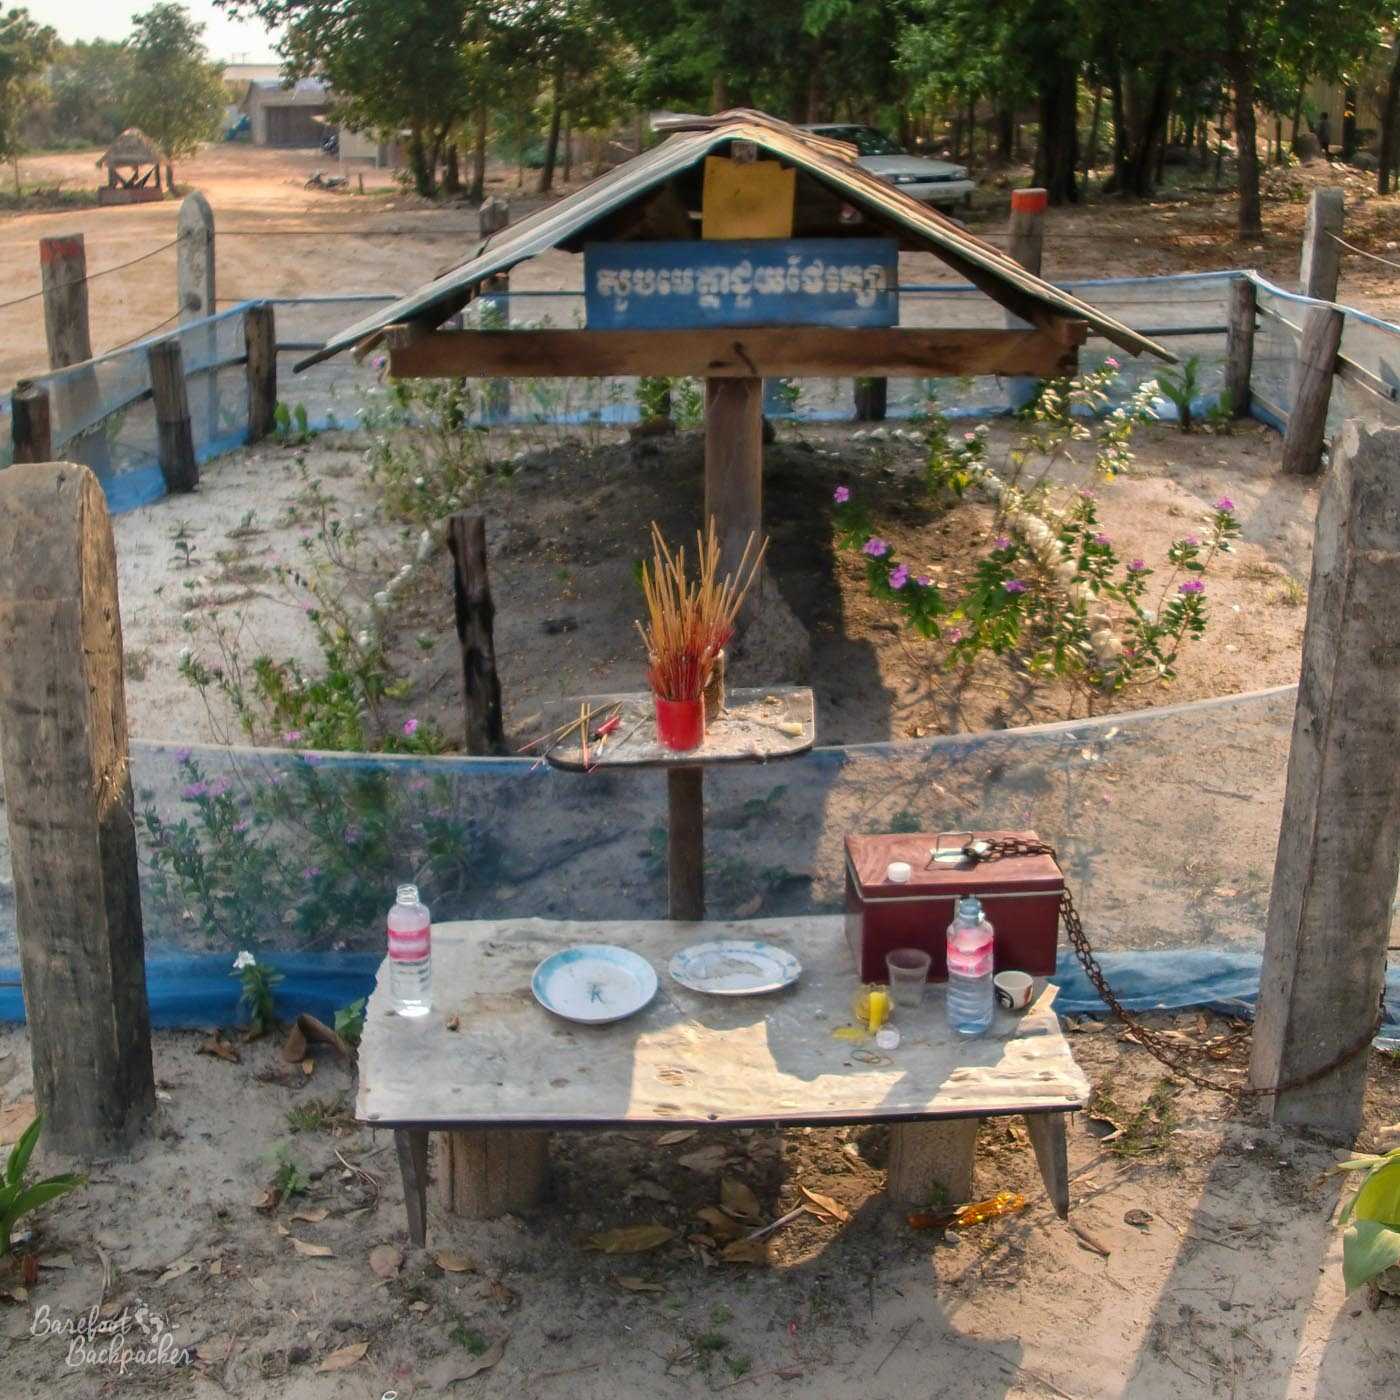 Pol Pot's cremation and burial site, in Anlong Veng, at the border with Thailand. It's a mound of soil under a wooden construction that has the feel of a large bird table. There are purple flowers with long stems growing on it. It is surrounded by a thin chicken wire fence. In front of the fence, at one end of the gravesite, is a makeshift table with plates, plastic water bottles, a metal box chained to a concrete fencepost, and a couple of jars of incense sticks.